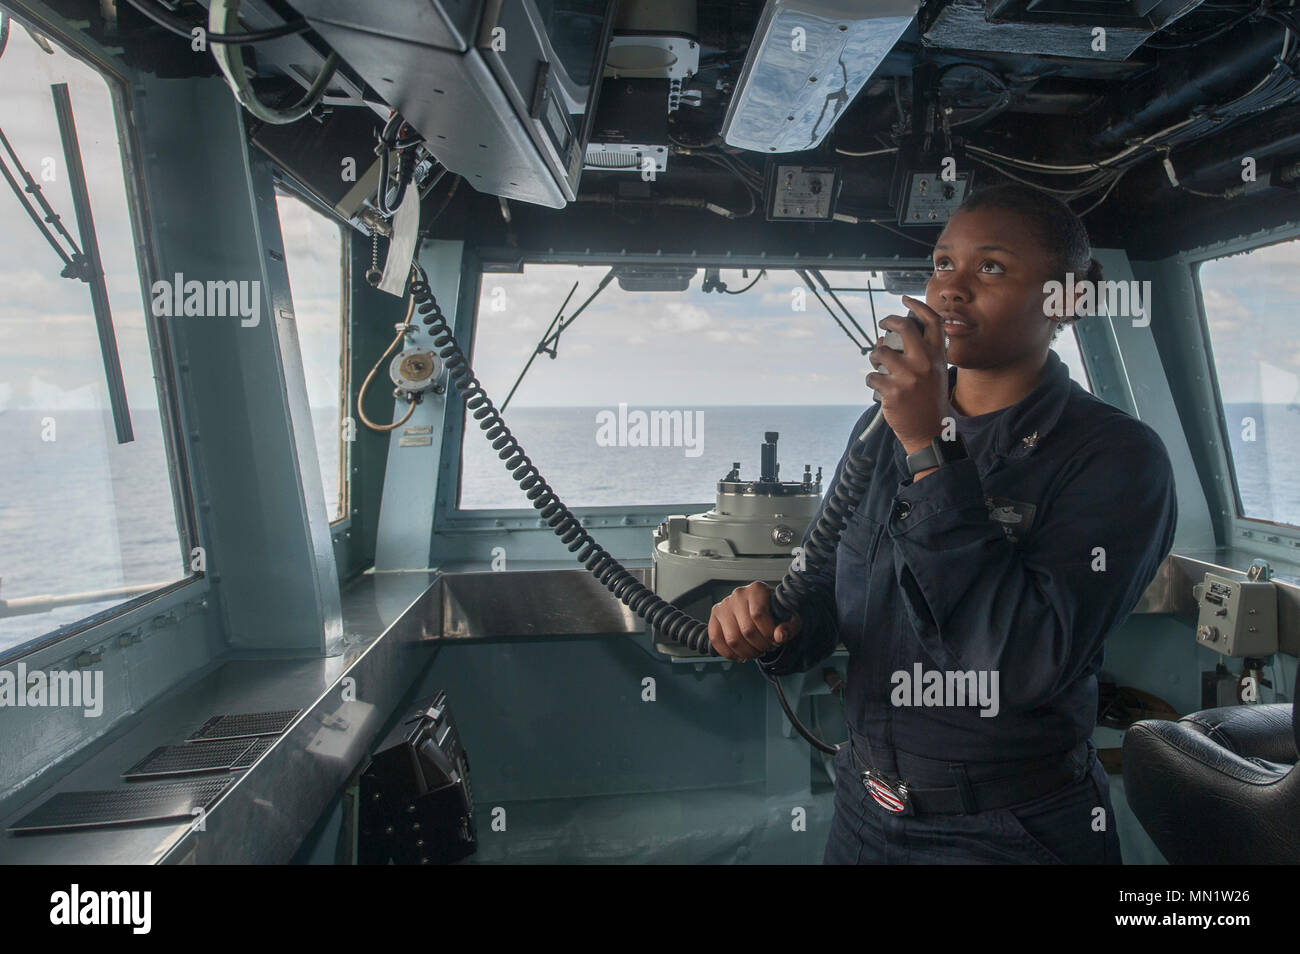 170810-N-ZS023-067 SOUTH CHINA SEA (Aug. 10, 2017) Quartermaster 2nd Class Taylor Nichols, a native of Valdosta, Georgia, assigned to the Navigation department aboard the amphibipus assault ship USS America (LHA 6), monitors the ship’s course in the bridge. America, part of the America Amphibious Ready Group, with embarked 15th Marine Expeditionary Unit, is operating in the Indo-Asia Pacific region to strengthen partnerships and serve as a ready-response force for any type of contingency. (U.S. Navy photo by Mass Communication Specialist Seaman Vance Hand/Released) Stock Photo